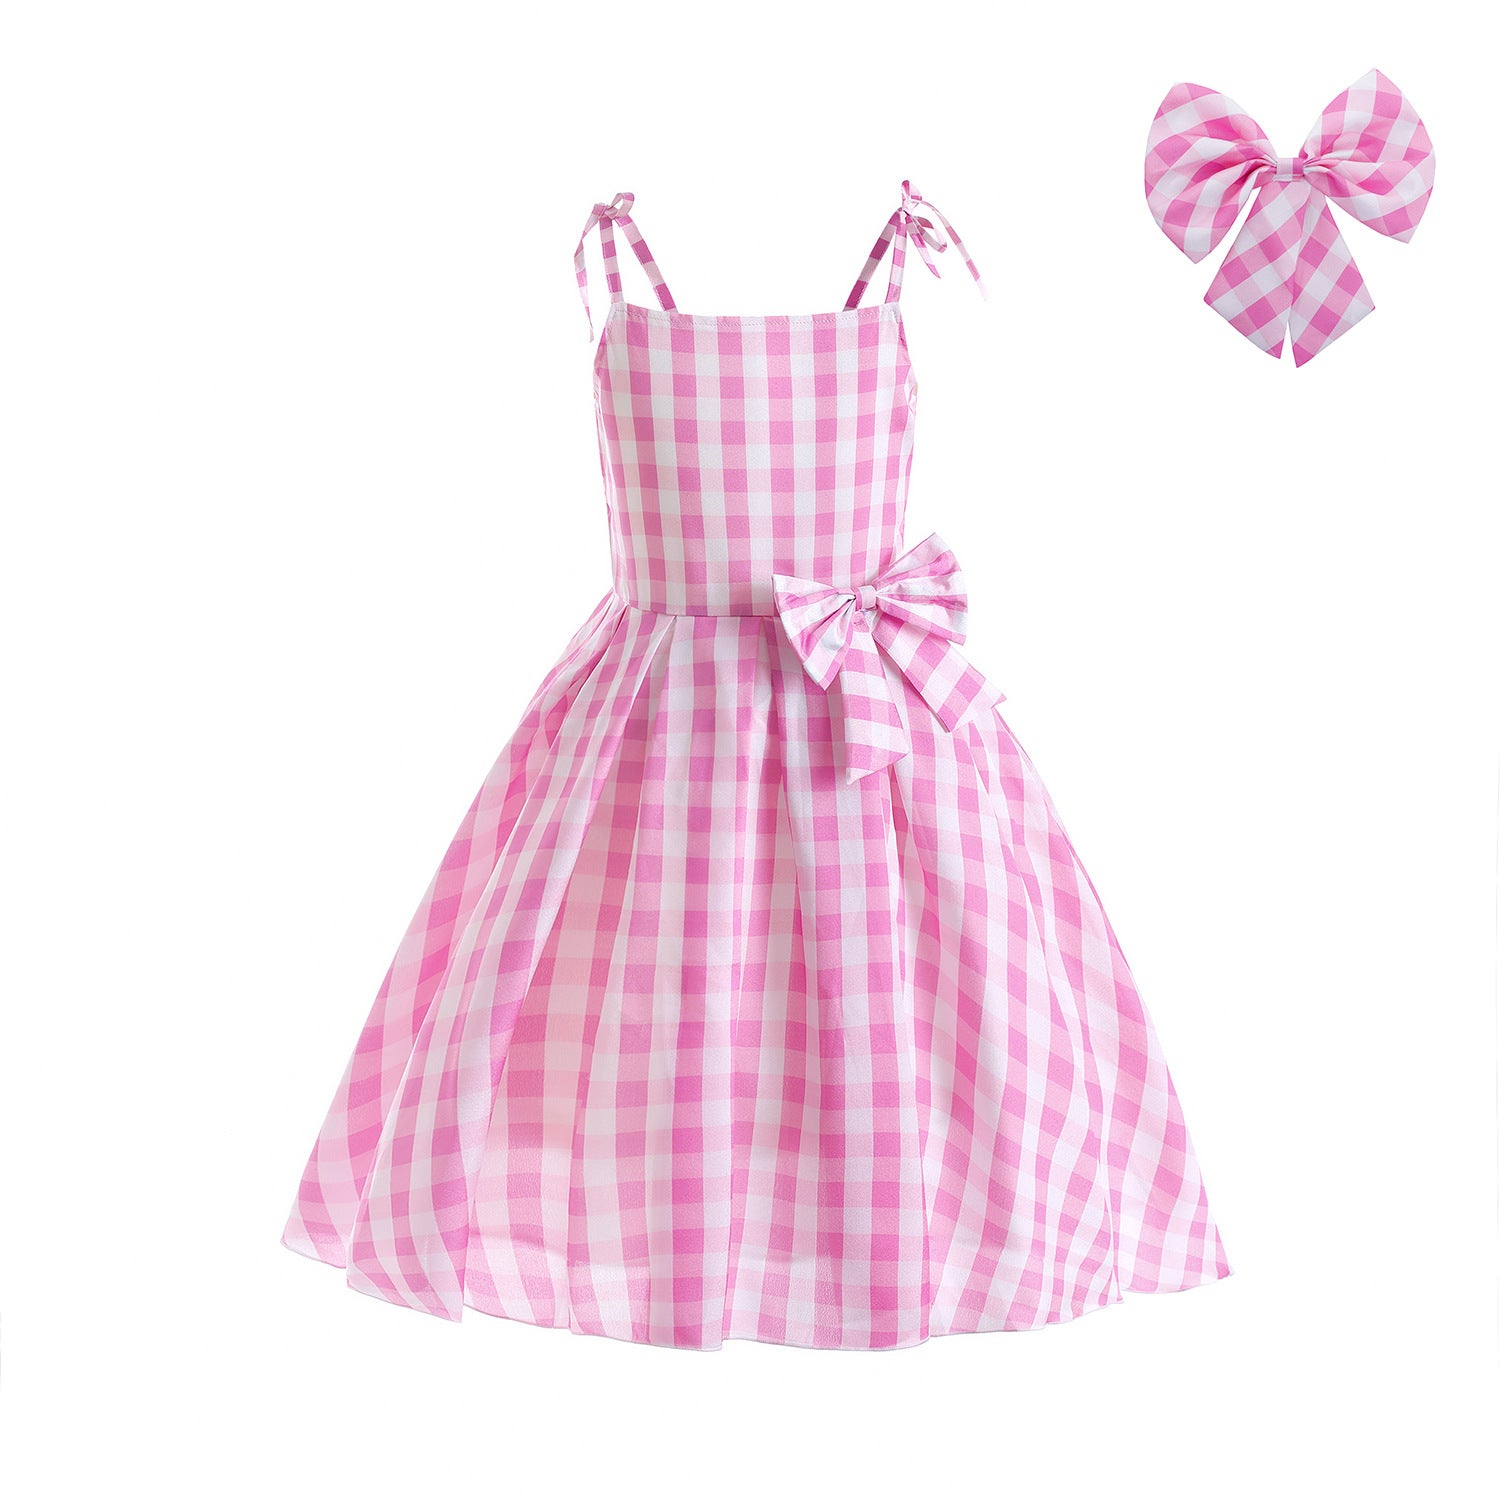 Girl Barbie Pink Plaid Sleeveless Cosplay Costume Dress For Party Holiday